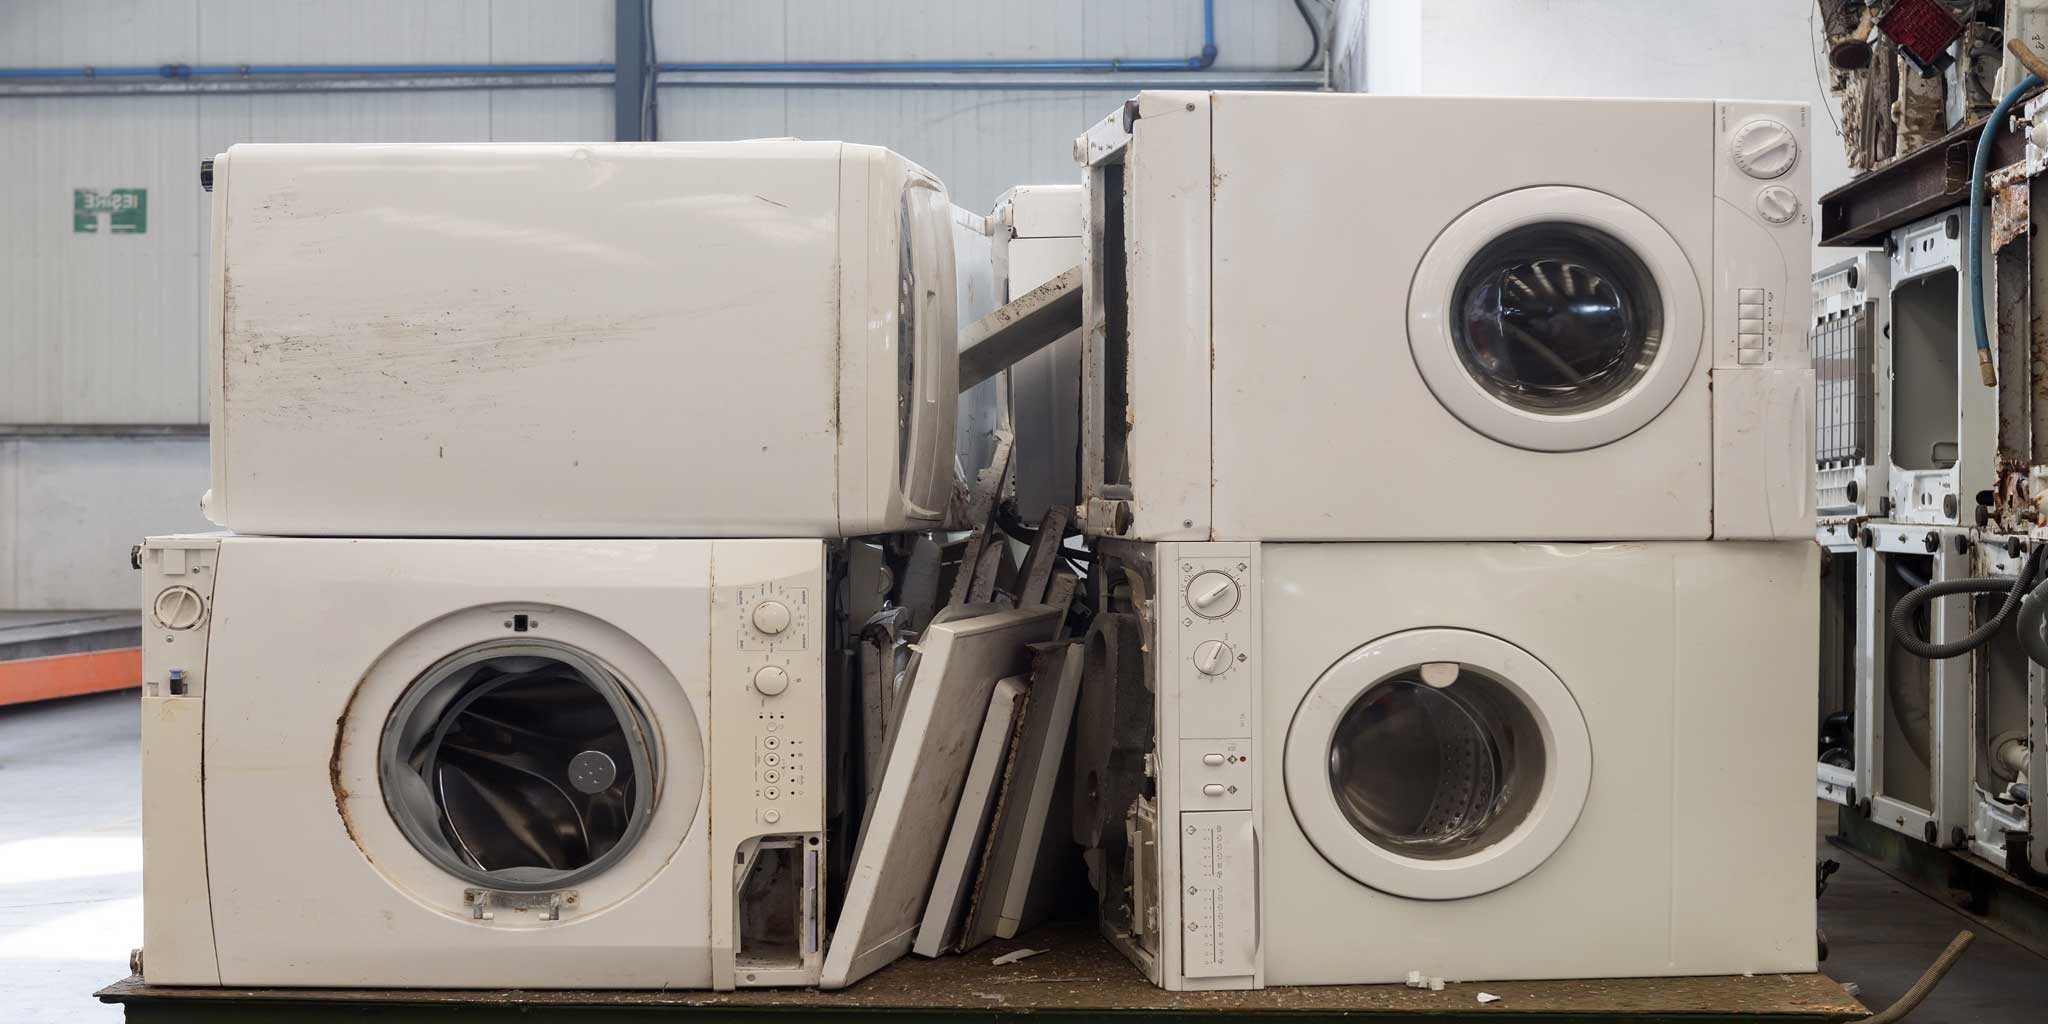 How To Dispose Of An Old Washing Machine